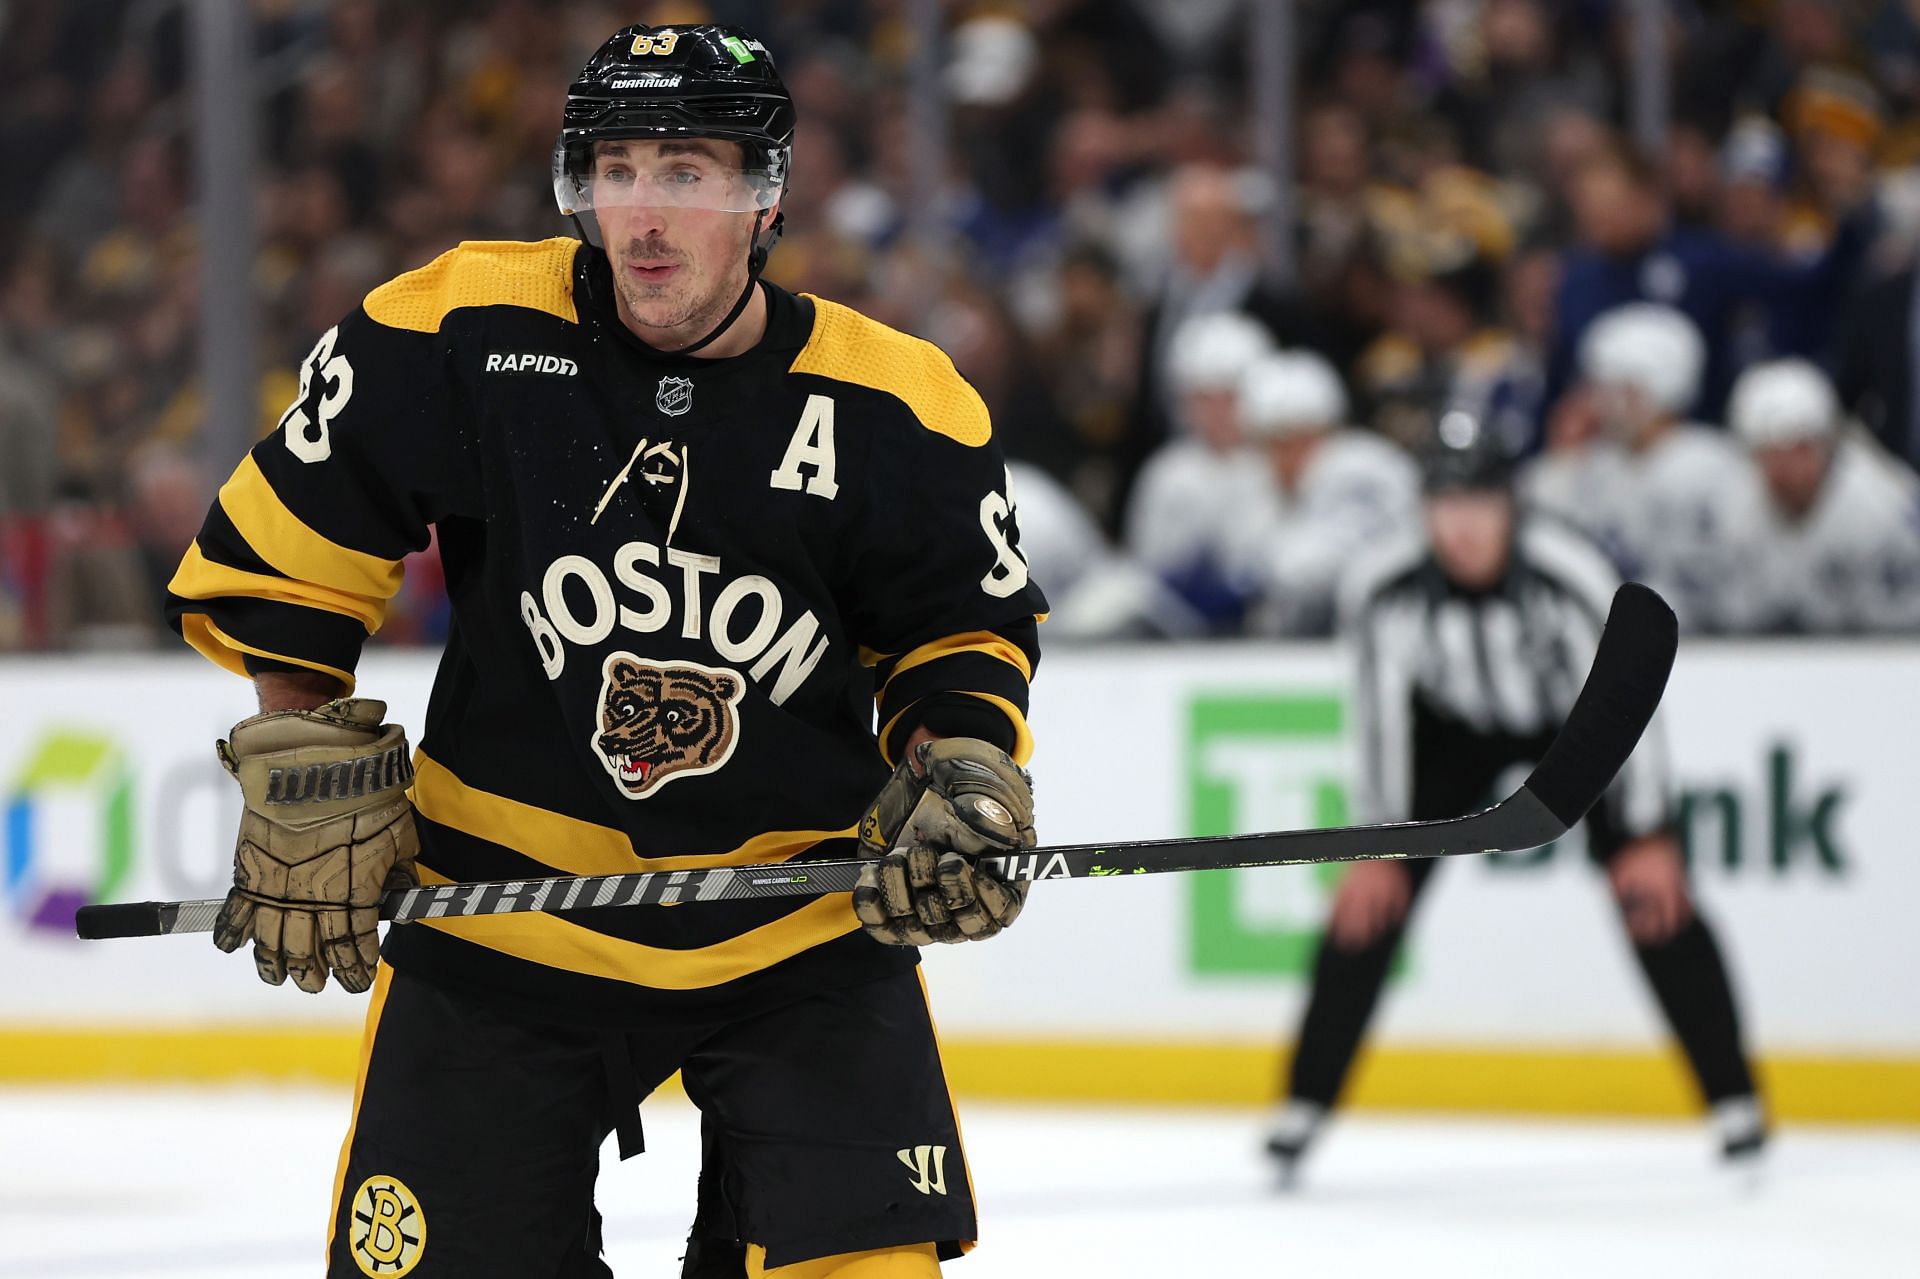 Brad Marchand Wife, Girl FriendFamily, Height, Weight, NHL Career